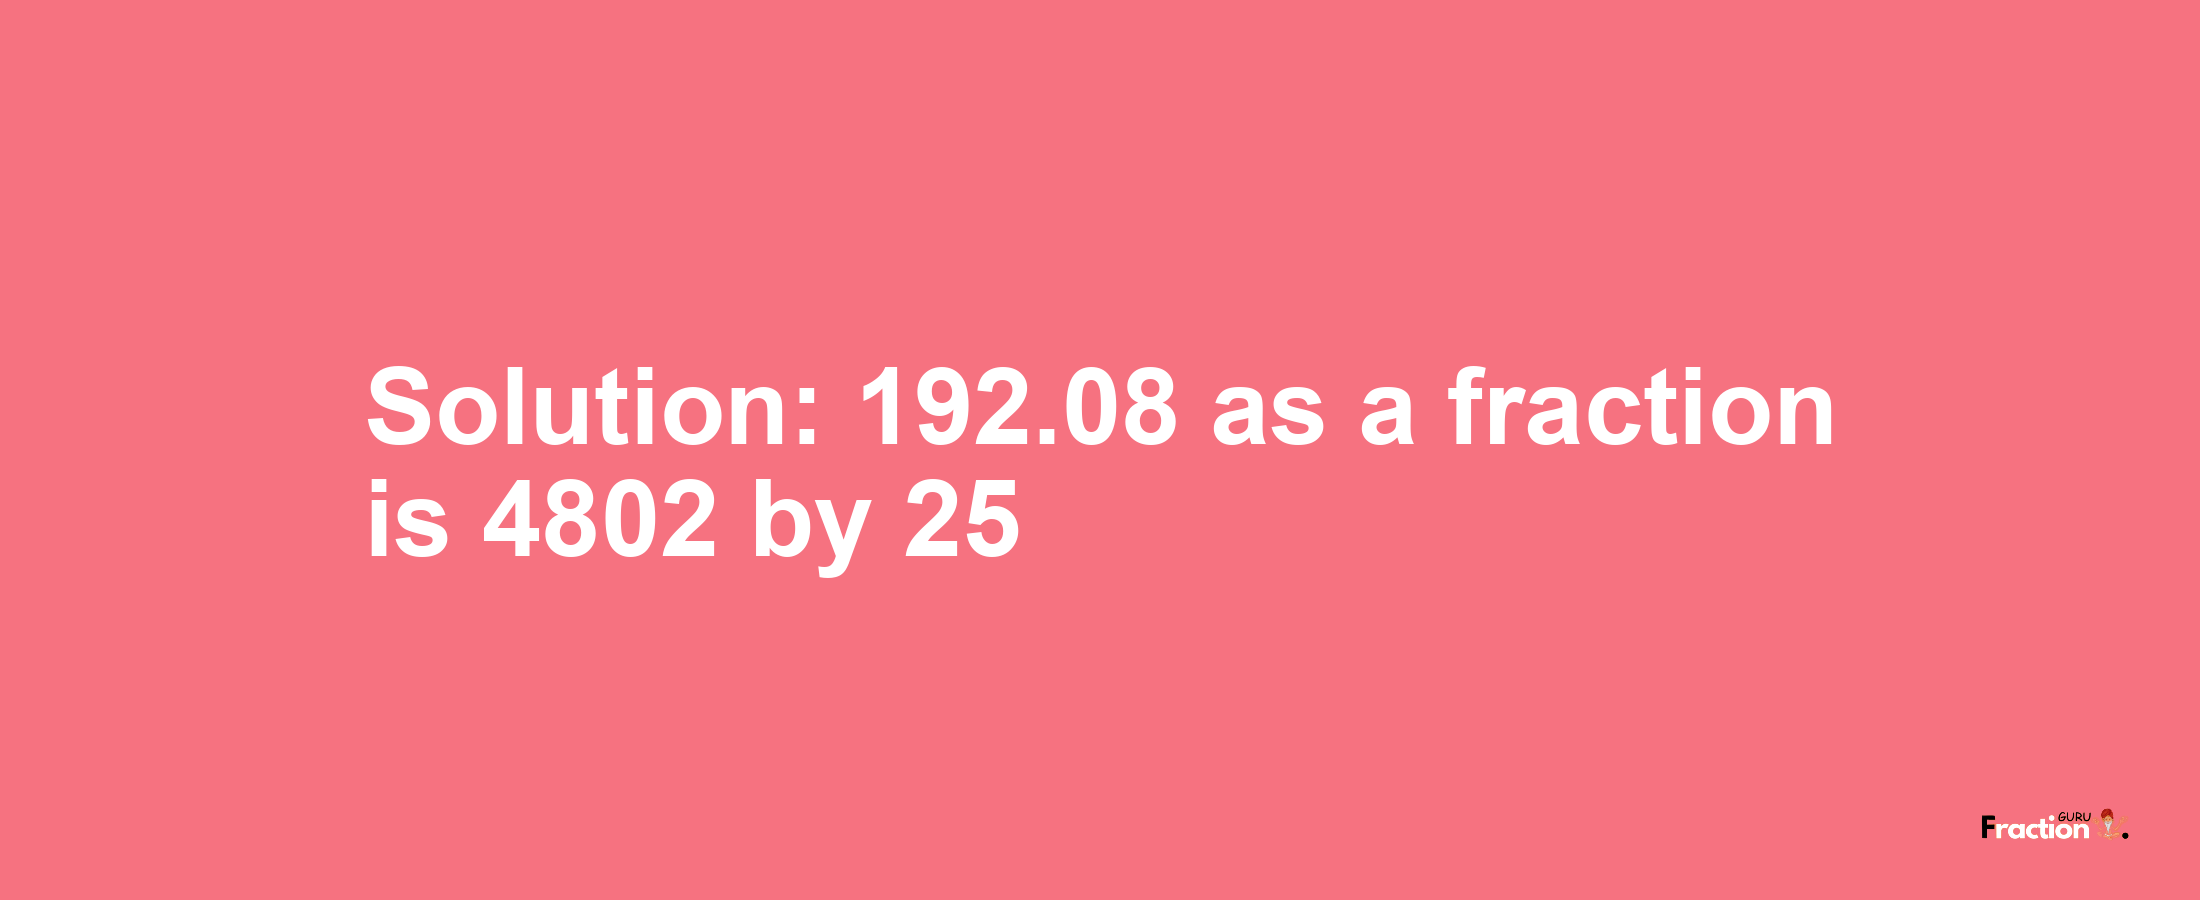 Solution:192.08 as a fraction is 4802/25